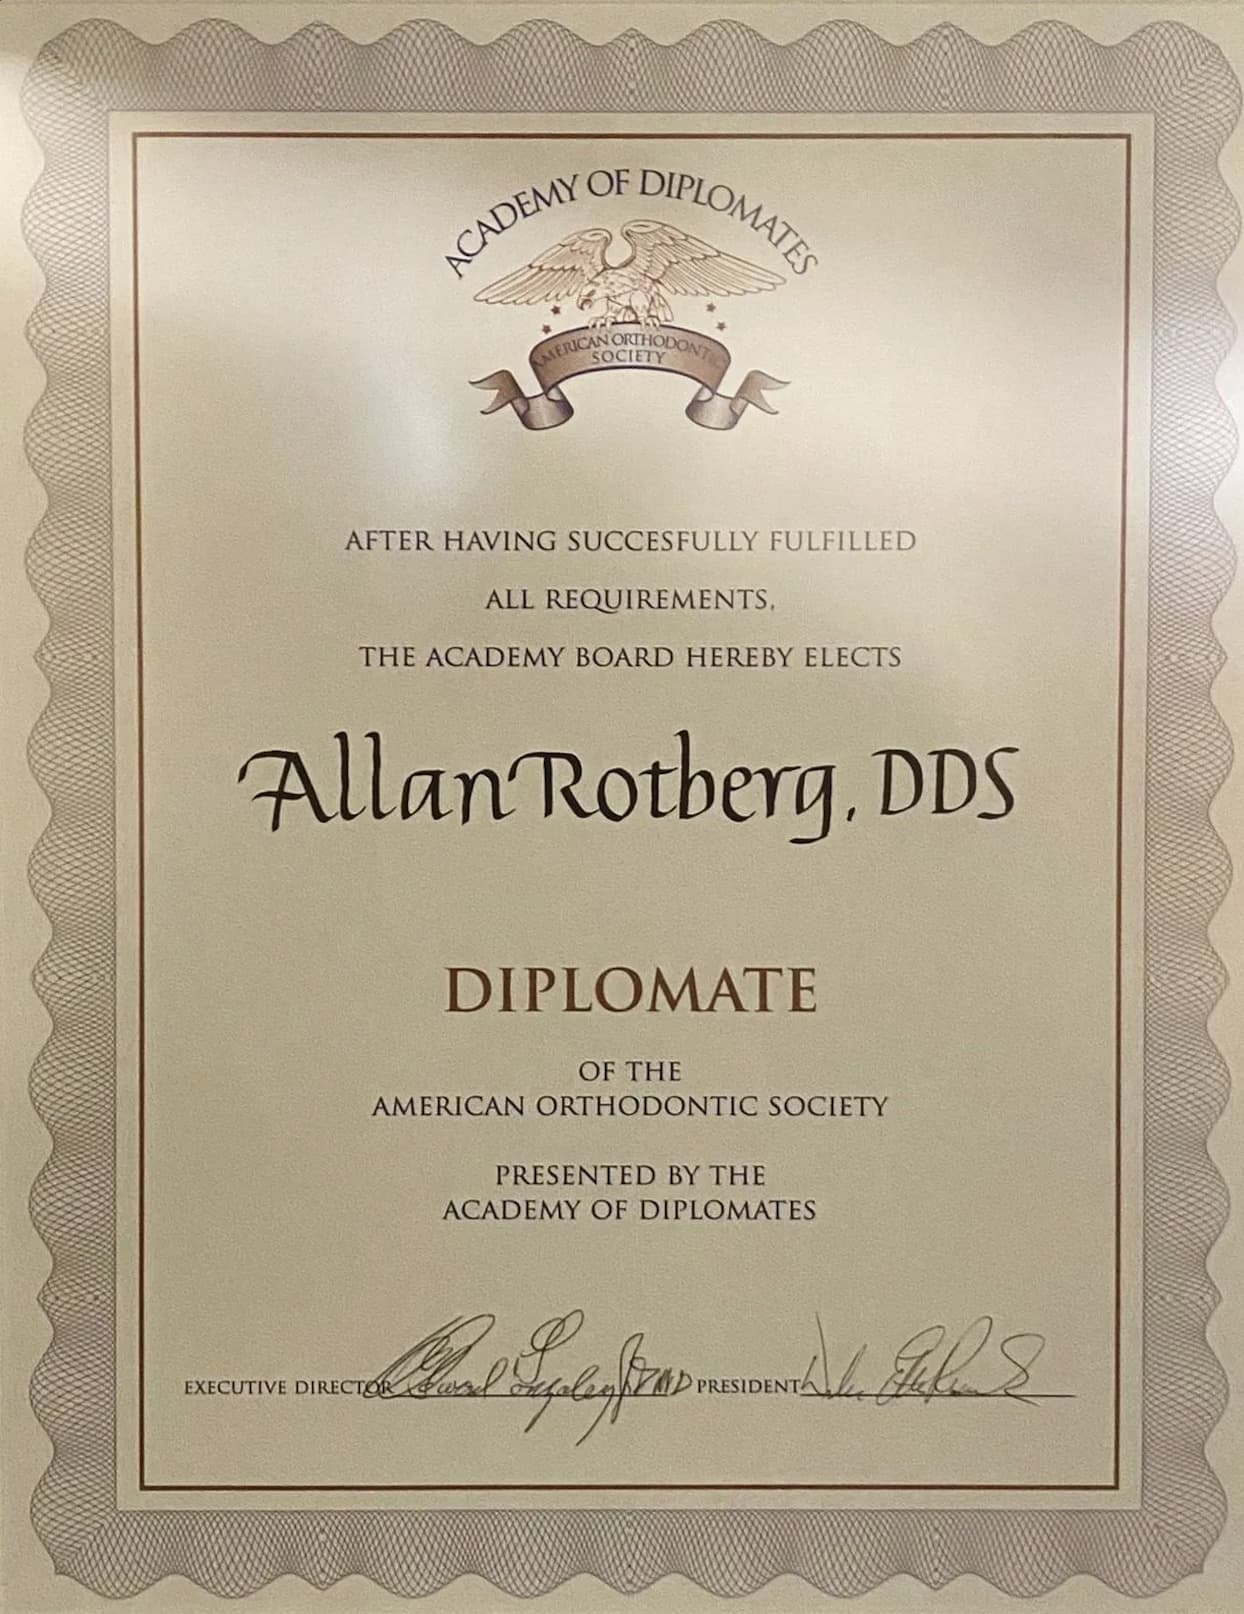 Diplomate of the American Orthodontic Society